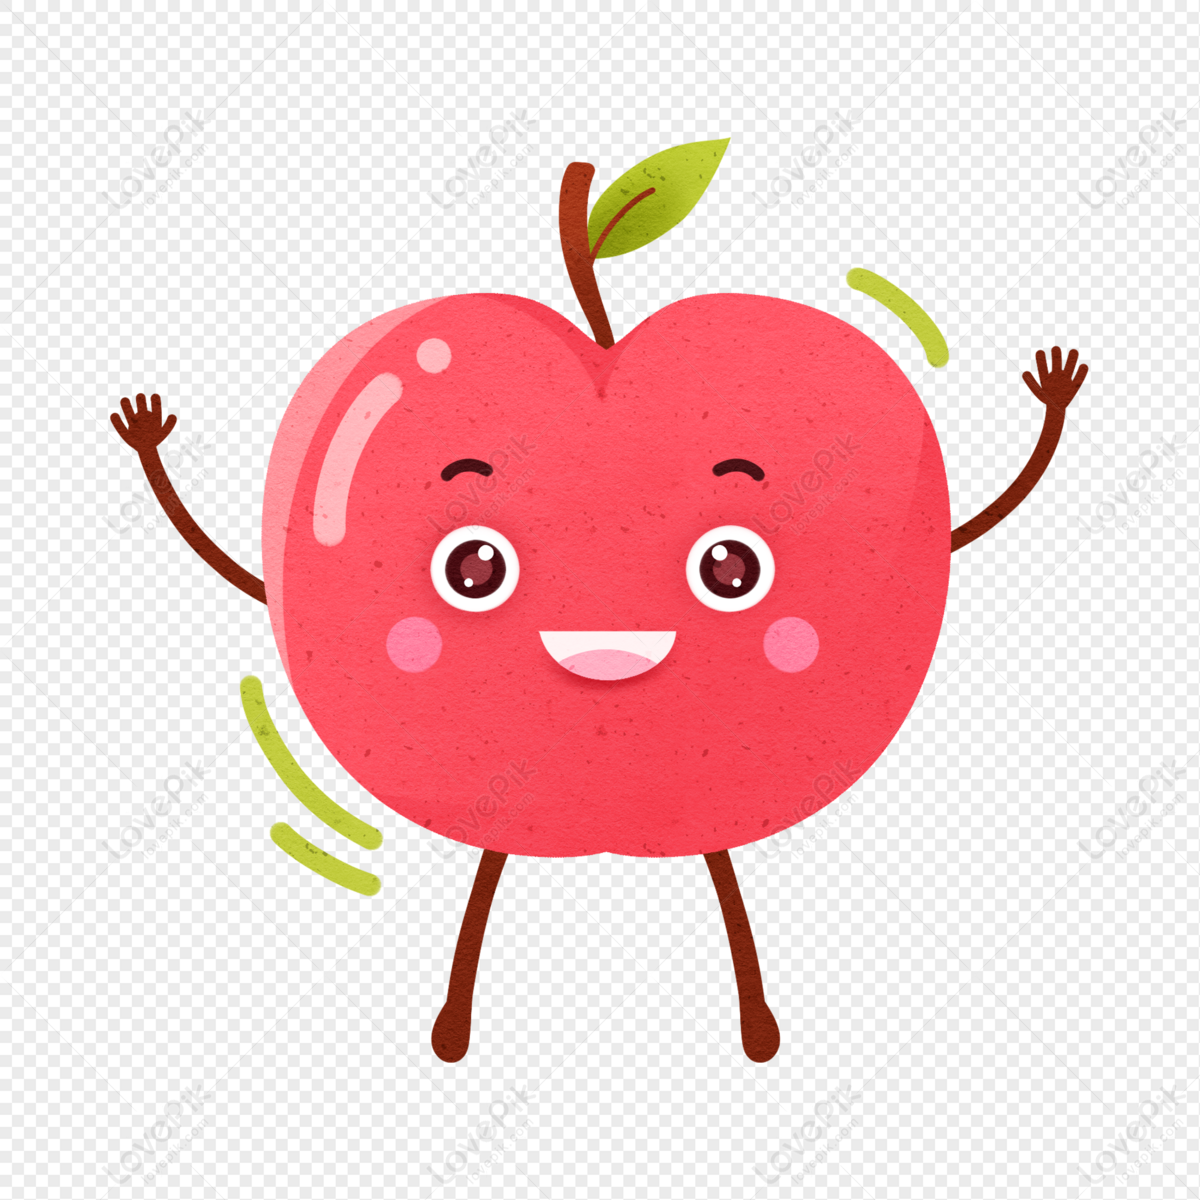 Cartoon Apple PNG Transparent Background And Clipart Image For Free  Download - Lovepik | 401408750